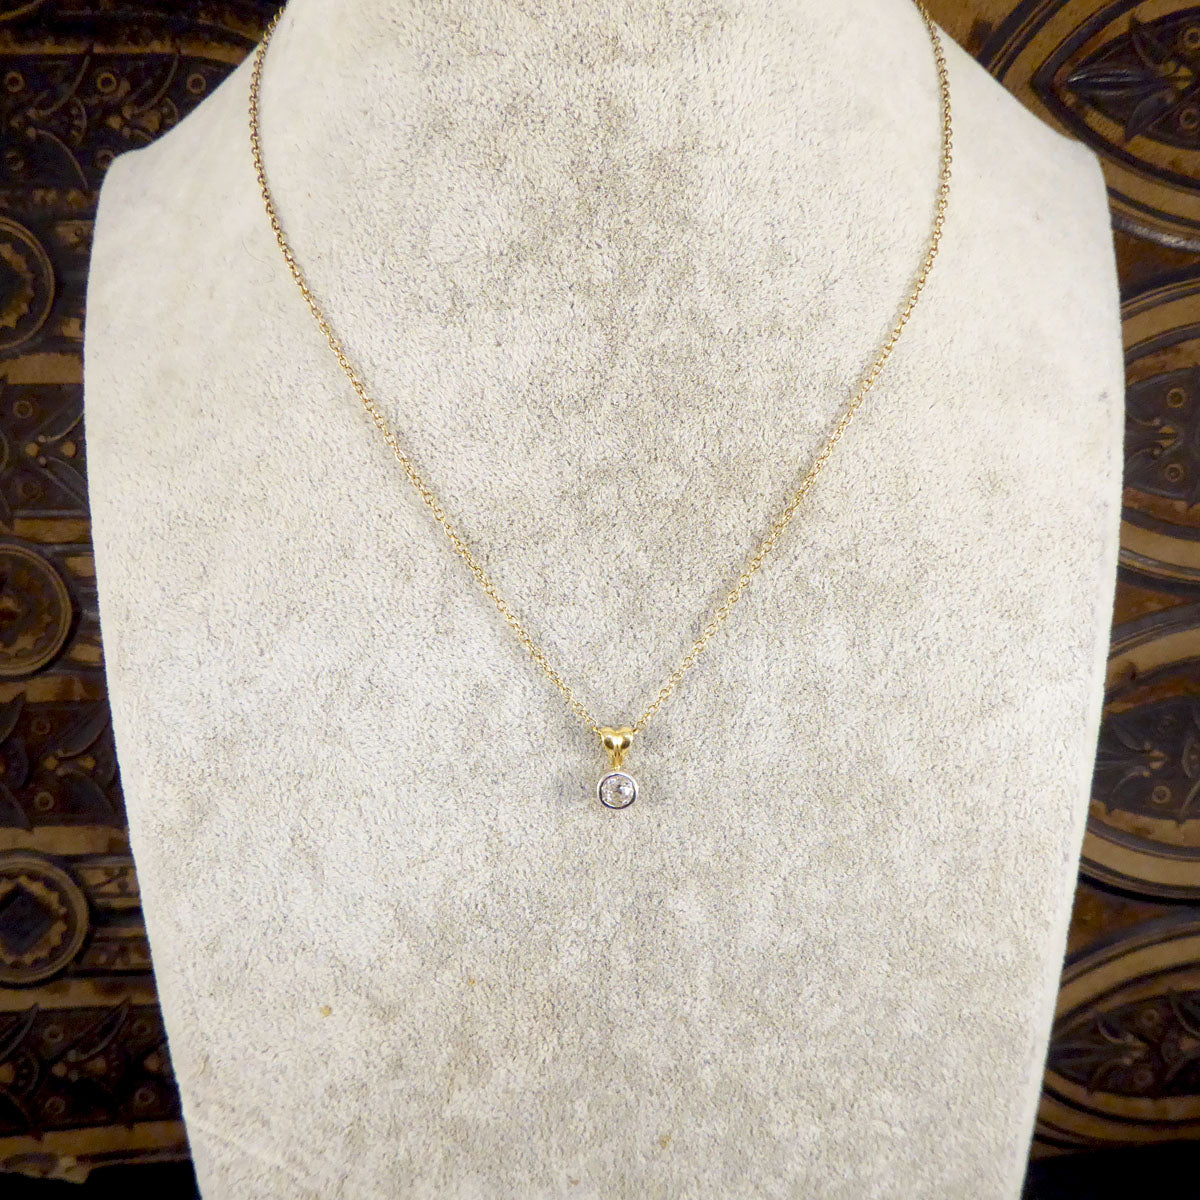 Vintage 0.50ct Old Cut Diamond Rub Over Pendant in 18ct White and Yellow Gold with 9ct Yellow Gold Chain